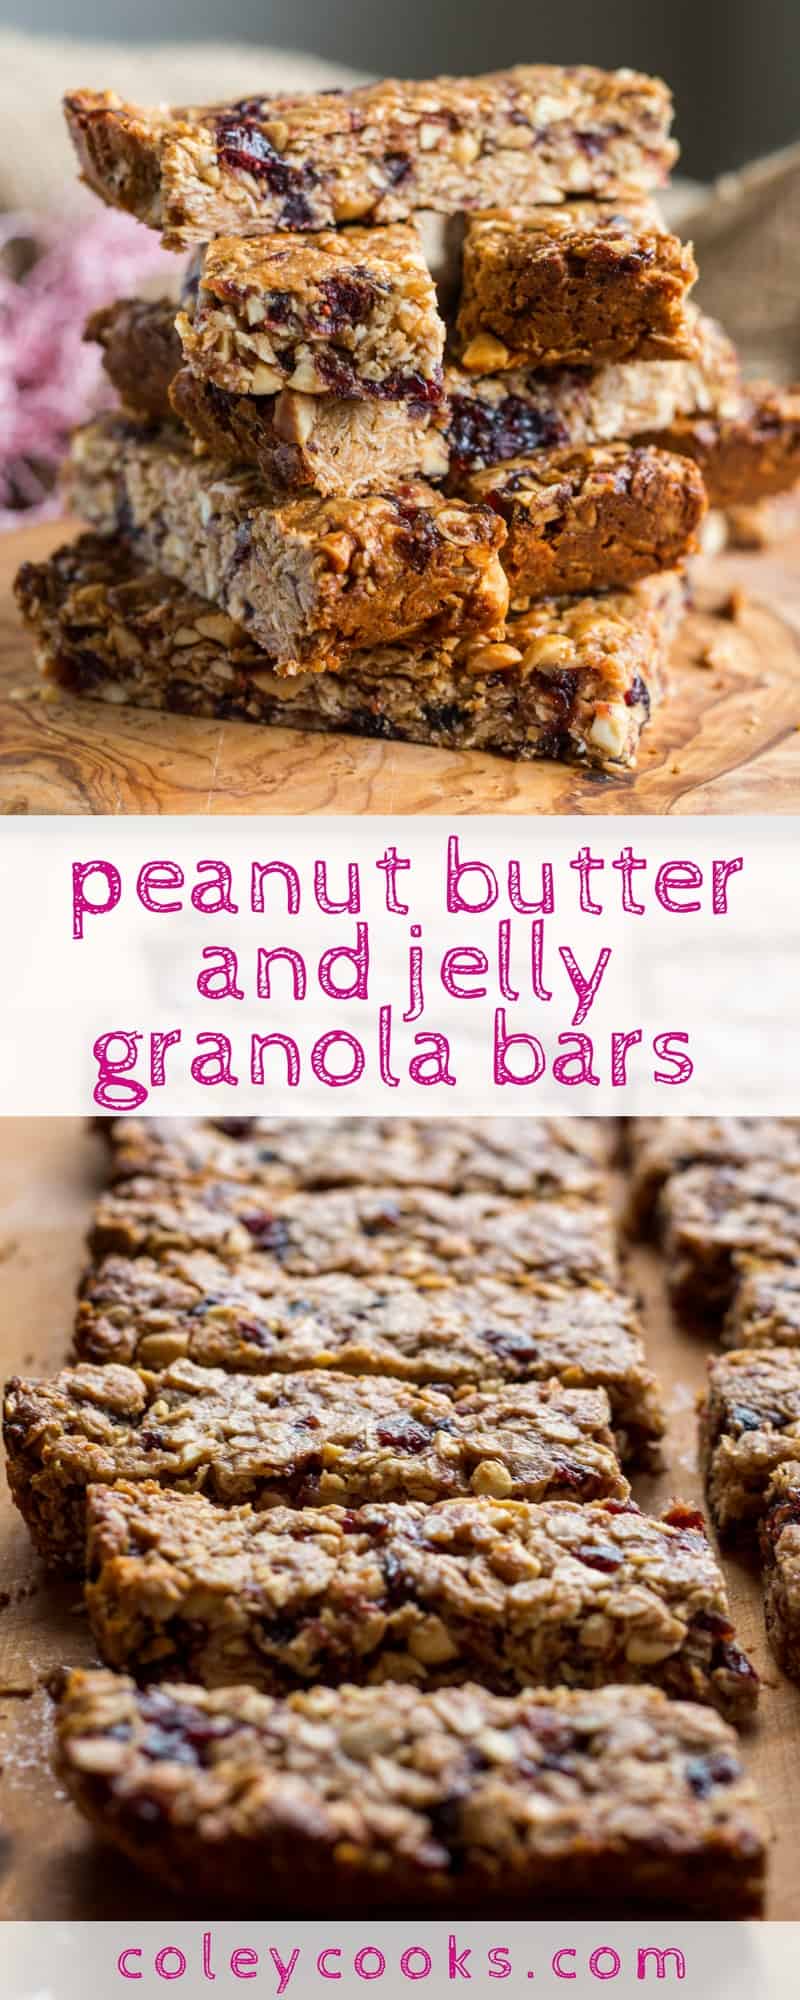 PEANUT BUTTER and JELLY GRANOLA BARS | This easy, healthy recipe for chewy peanut butter and jelly granola bars is gluten free + vegan! Great for kids, quick breakfasts, and snacking on the go! #glutenfree #vegan | ColeyCooks.com